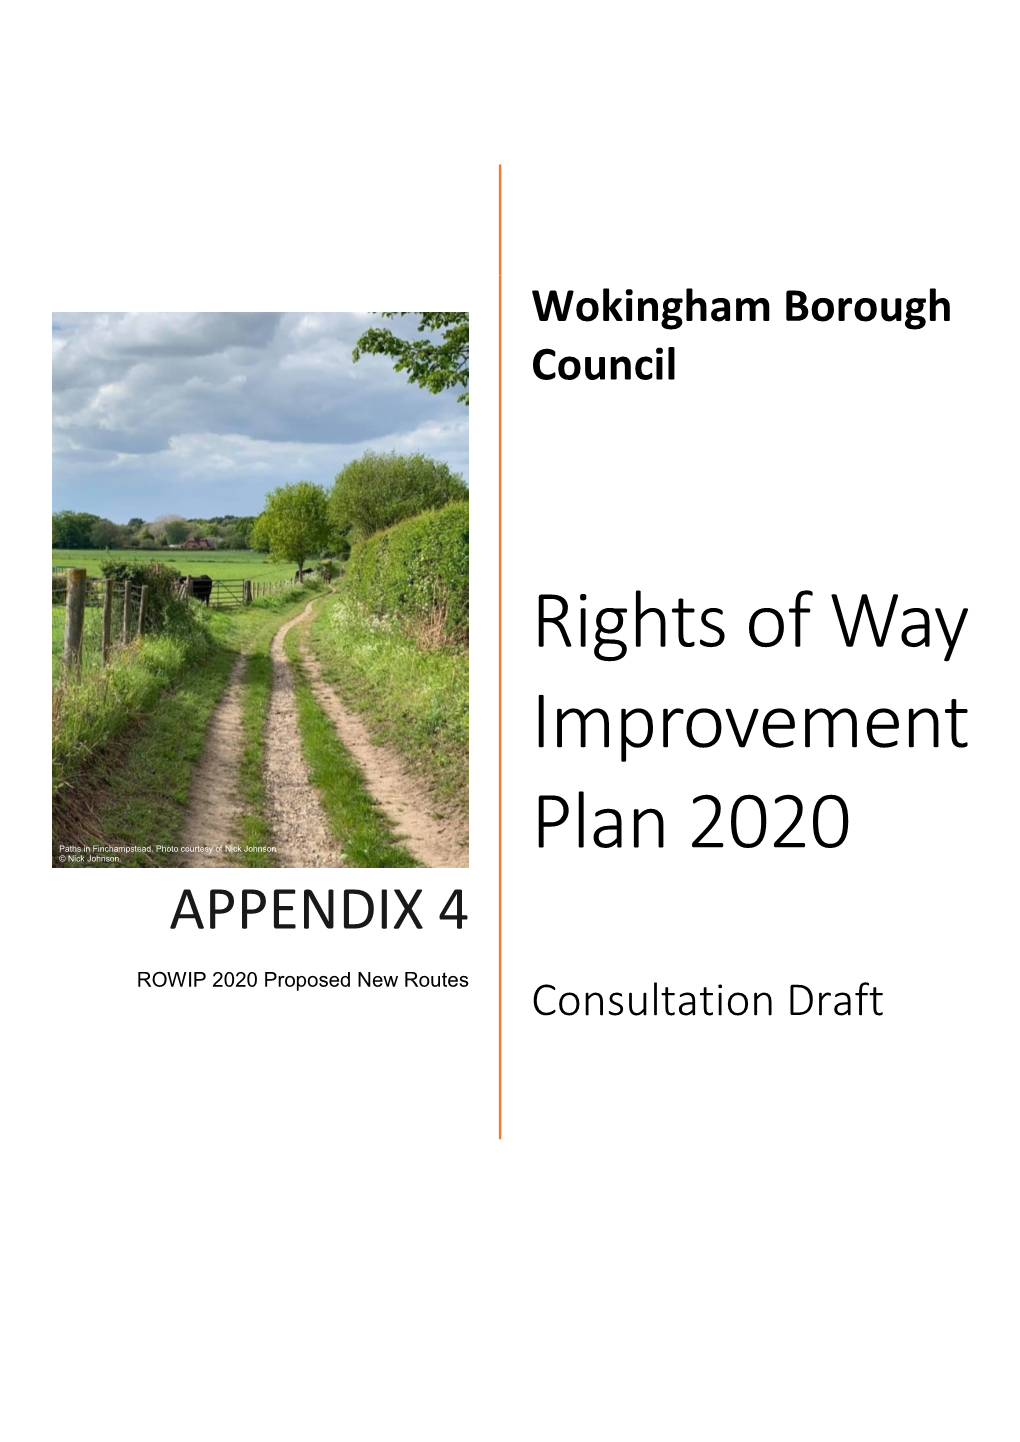 APPENDIX 4 ROWIP 2020 Proposed New Routes Consultation Draft